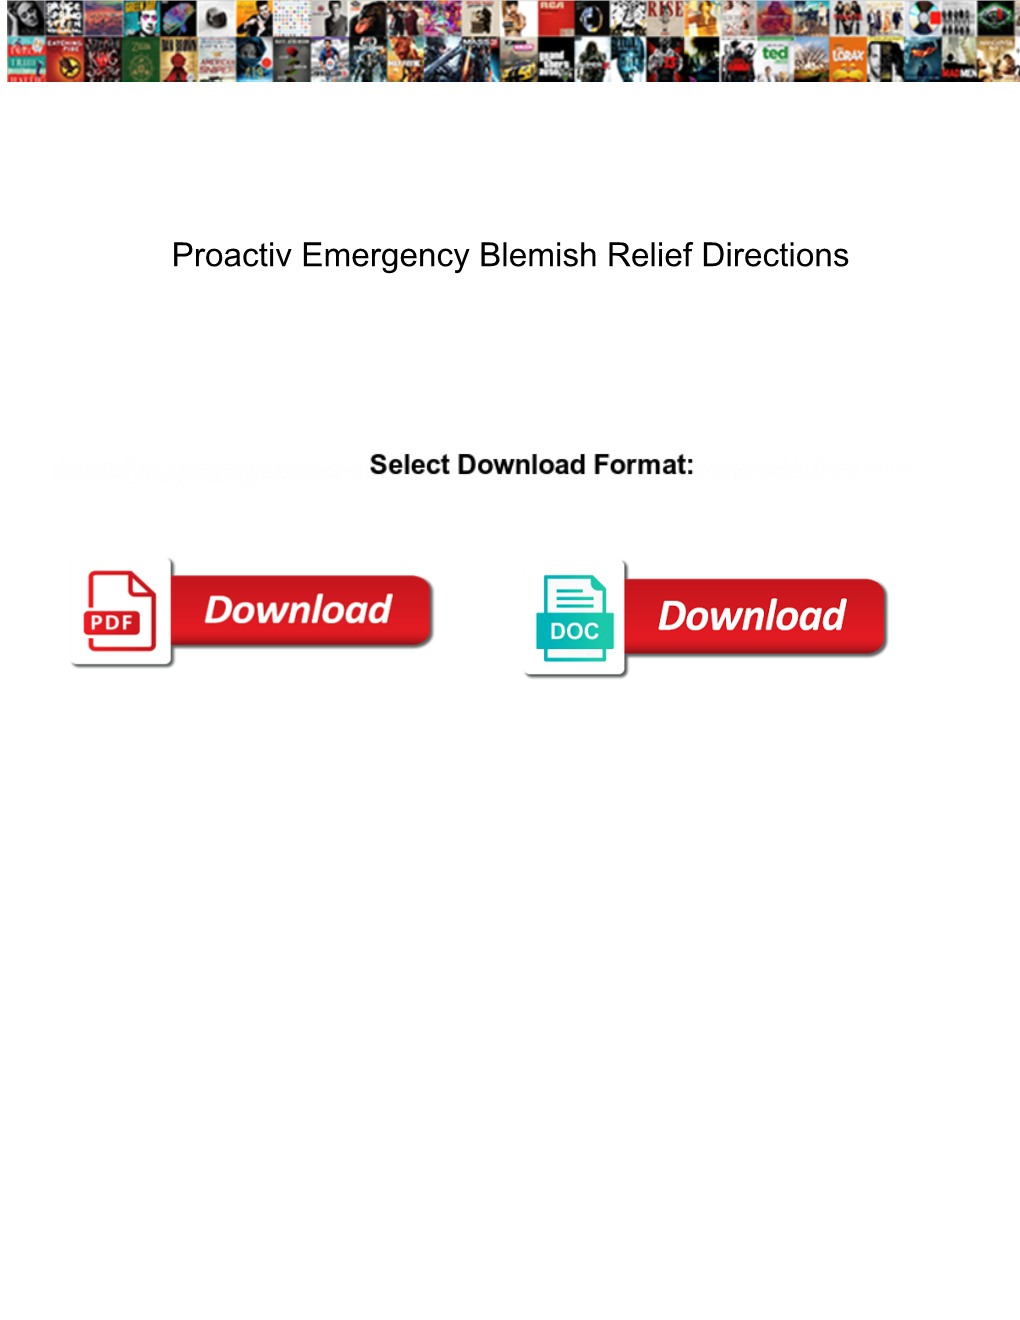 Proactiv Emergency Blemish Relief Directions